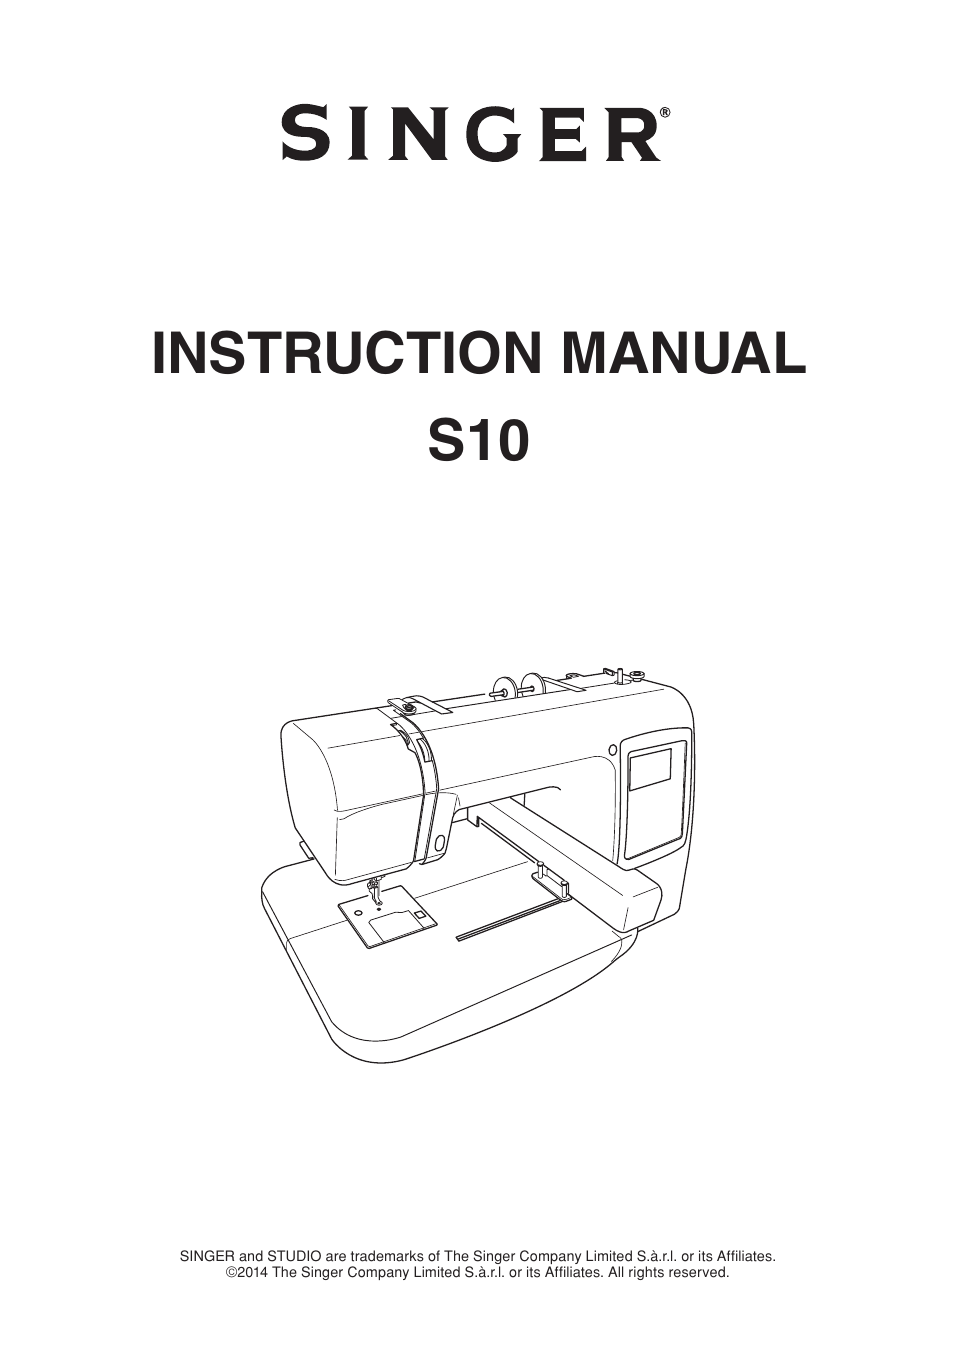 SINGER S10 STUDIO Instruction Manual User Manual | 56 pages